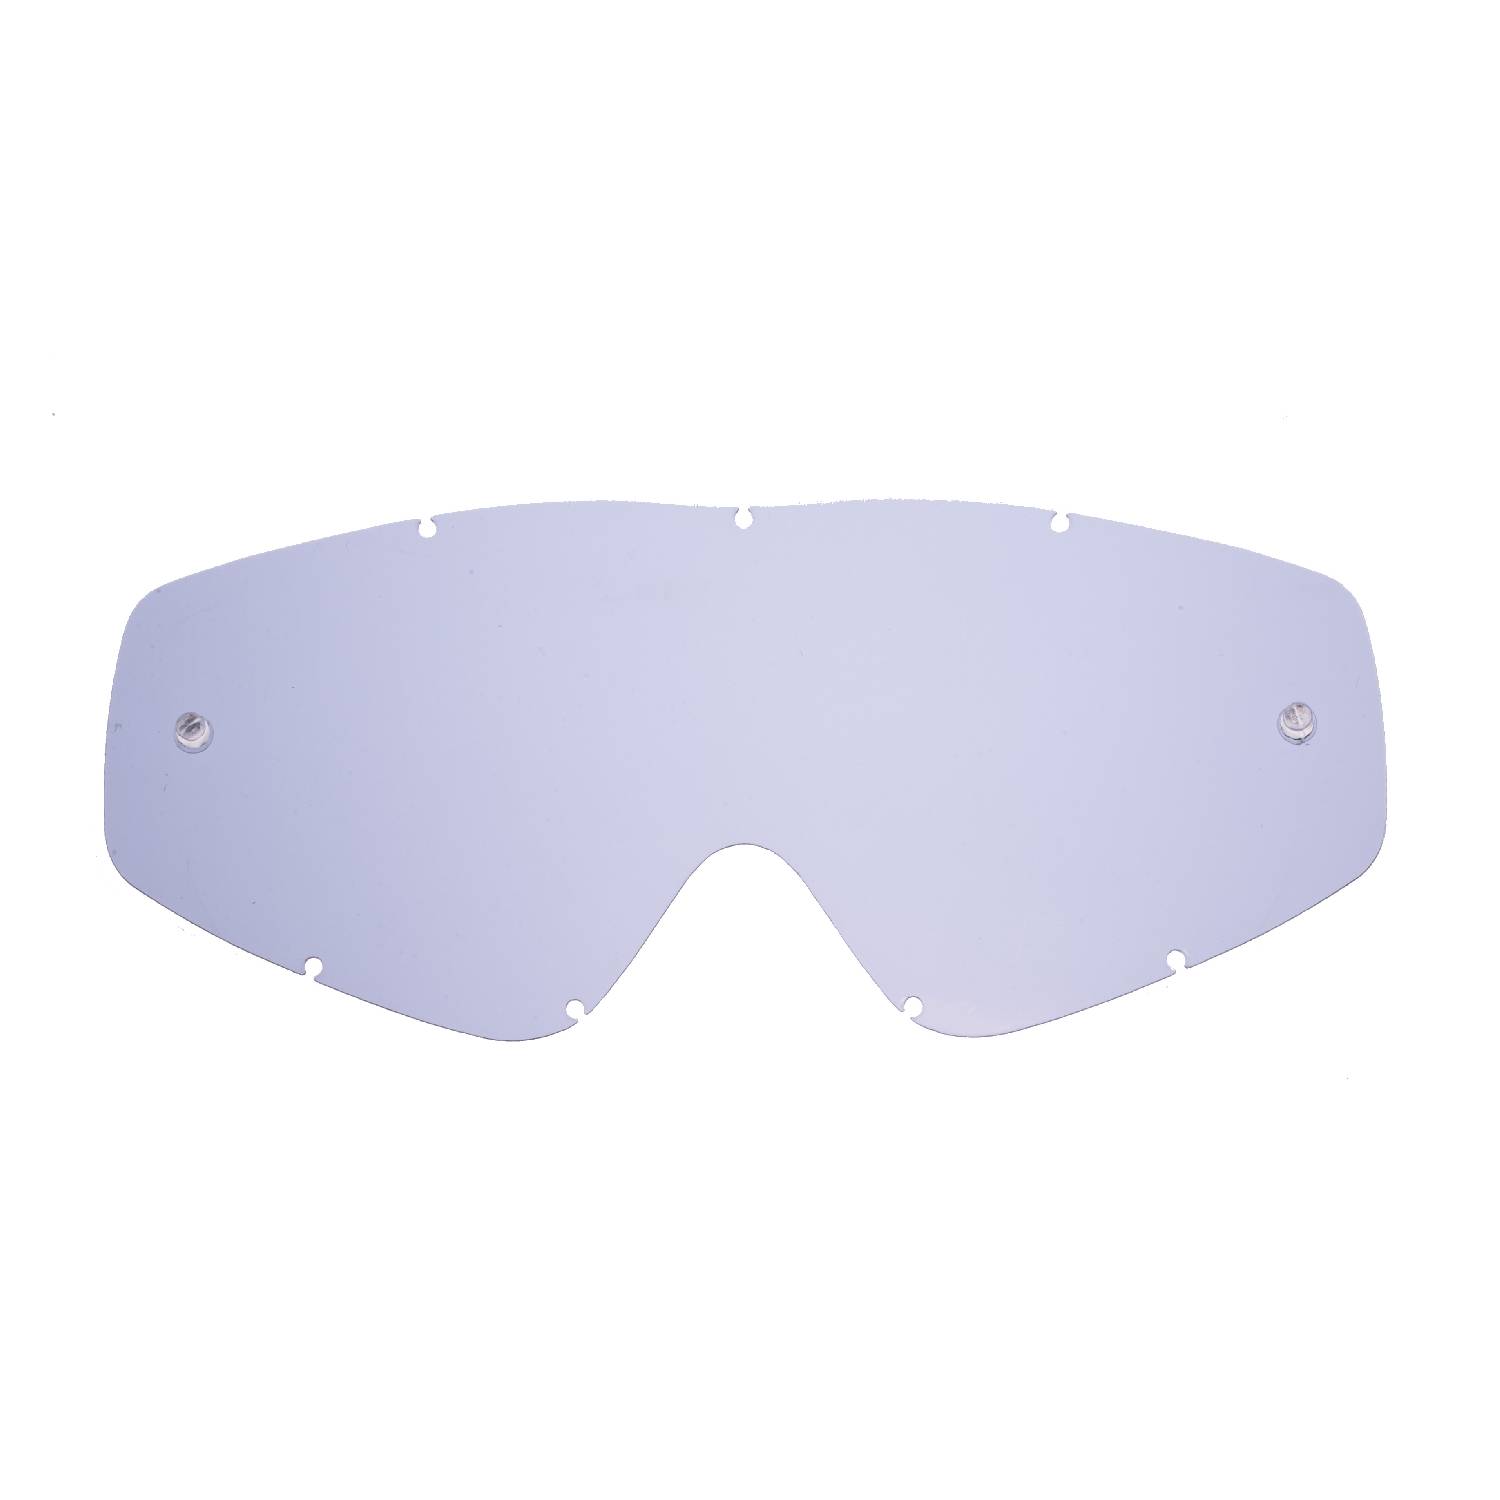 smokey replacement lenses for goggles compatible for Eks goggle